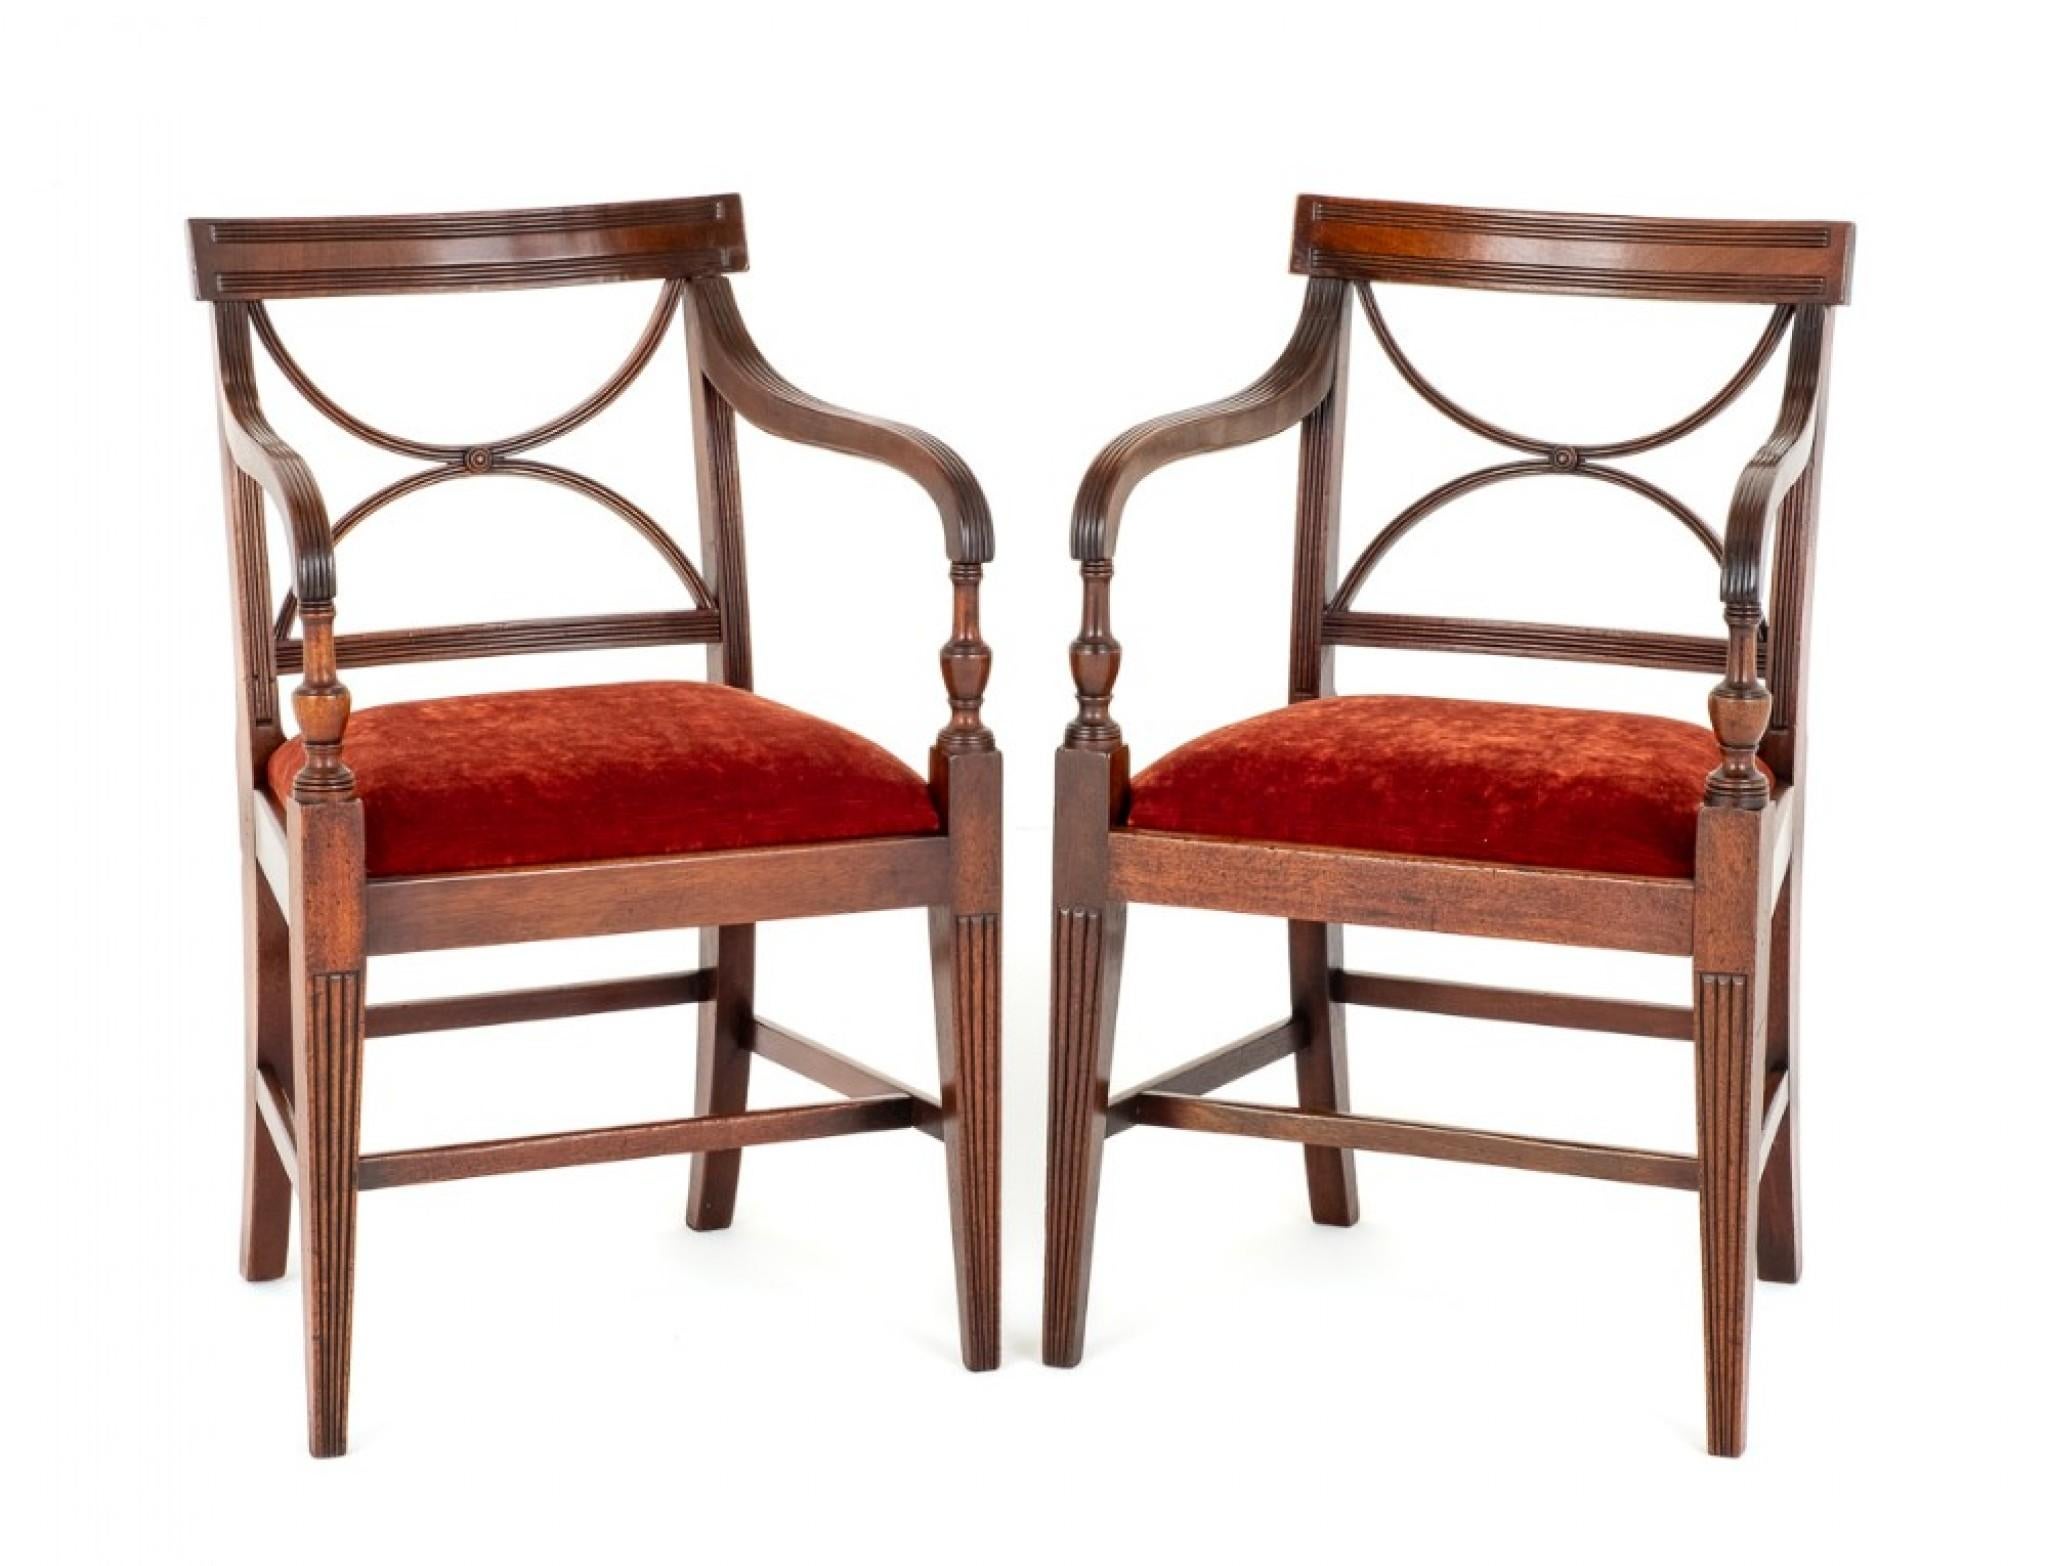 Pair Regency Arm Chairs Period Mahogany Antique For Sale 1